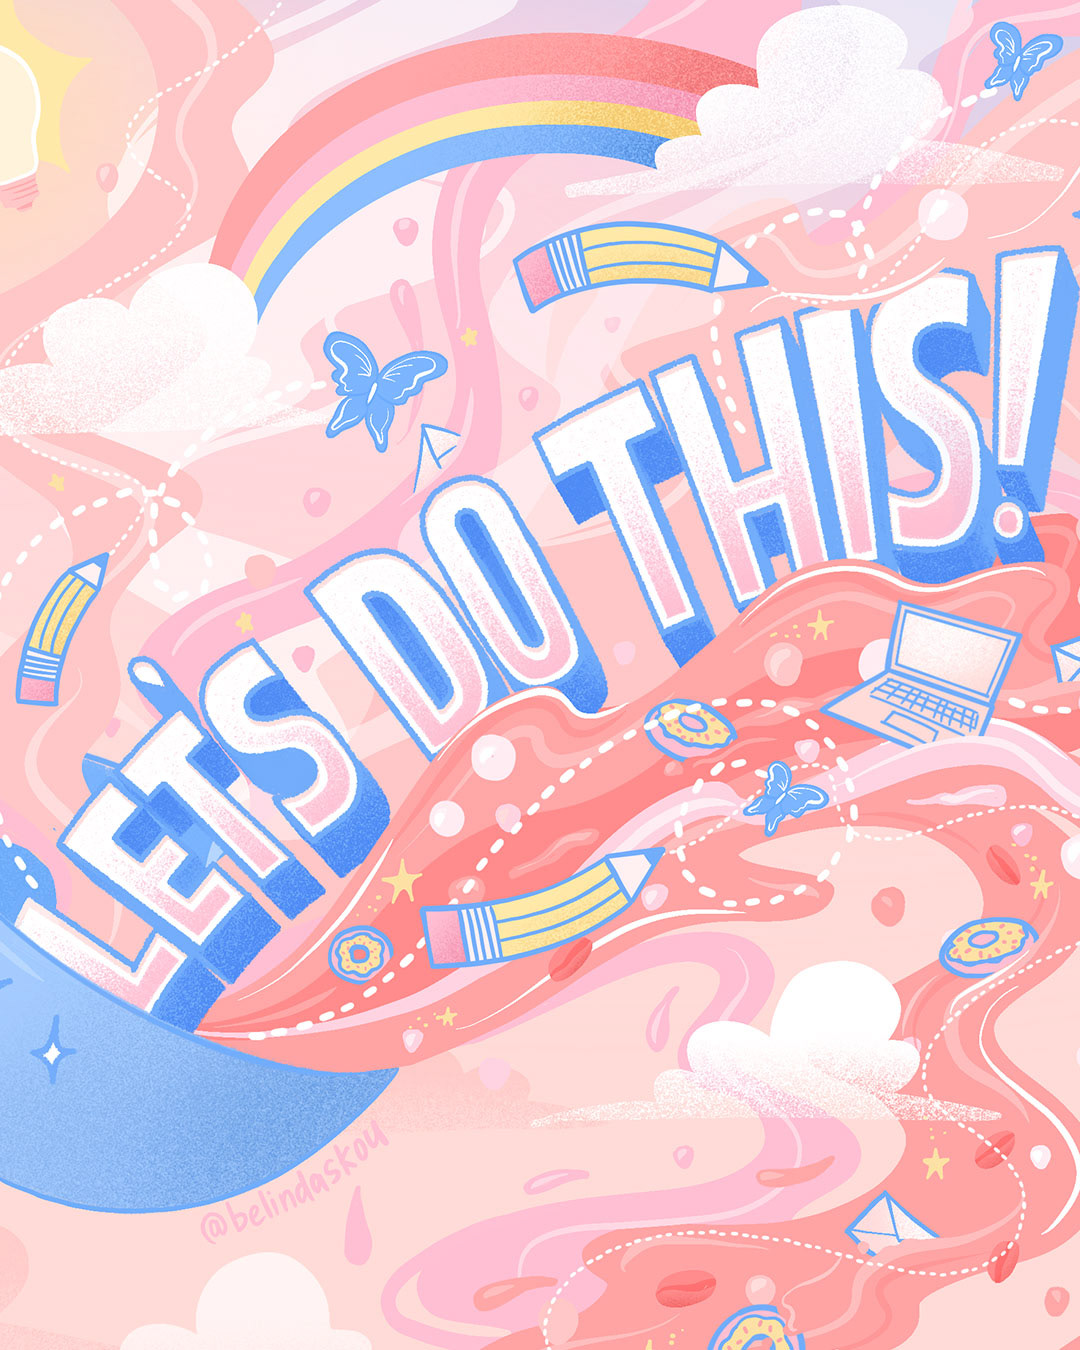 Closeup of with an imaginative spill of illustrations, doodles, and lettering "let's do this!"